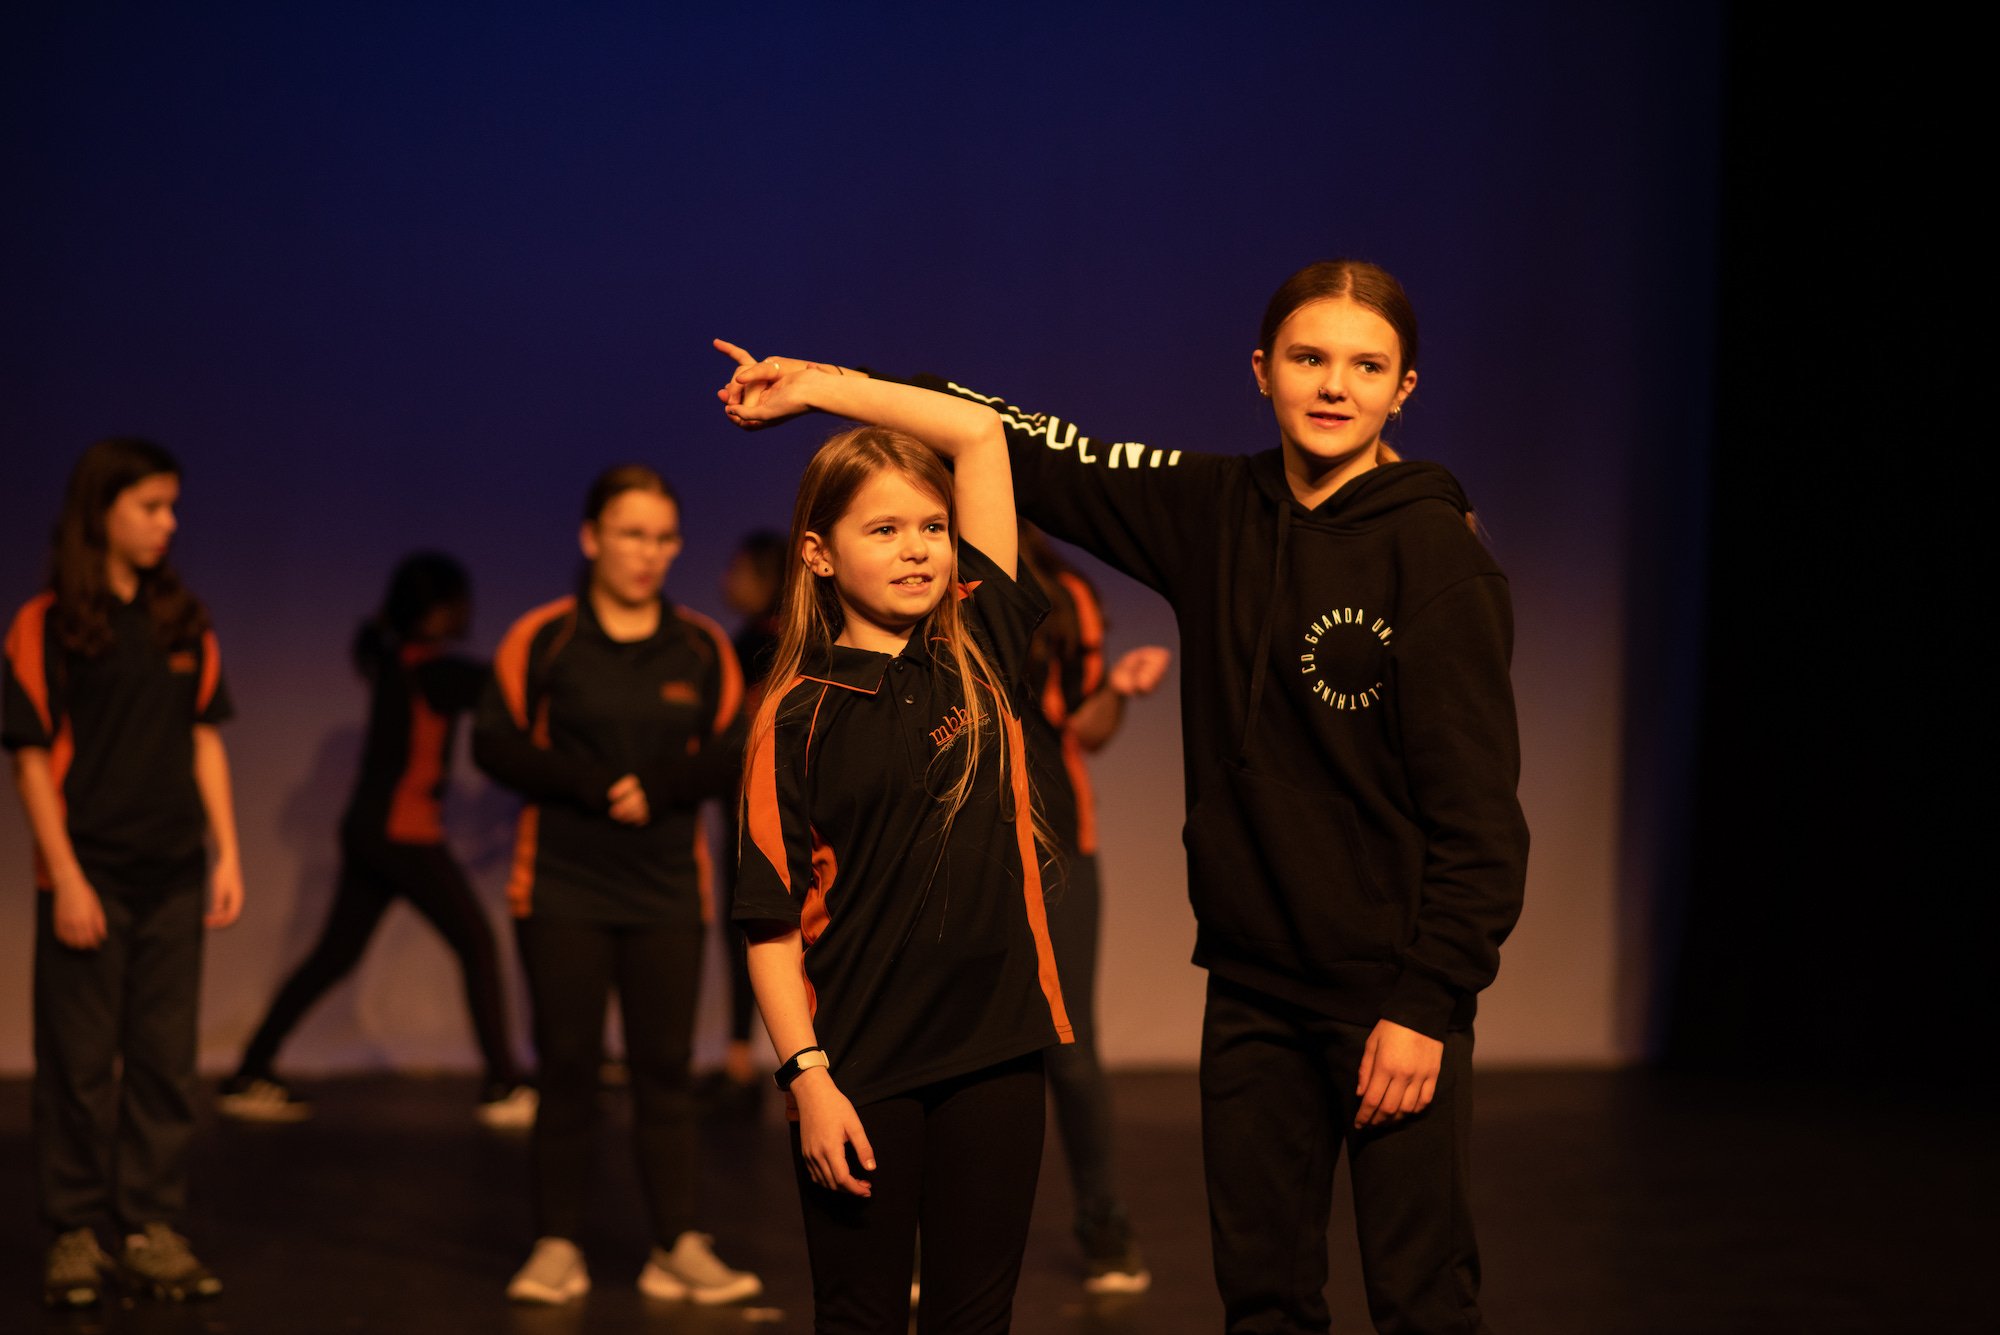  older and younger students dancing together on stage  